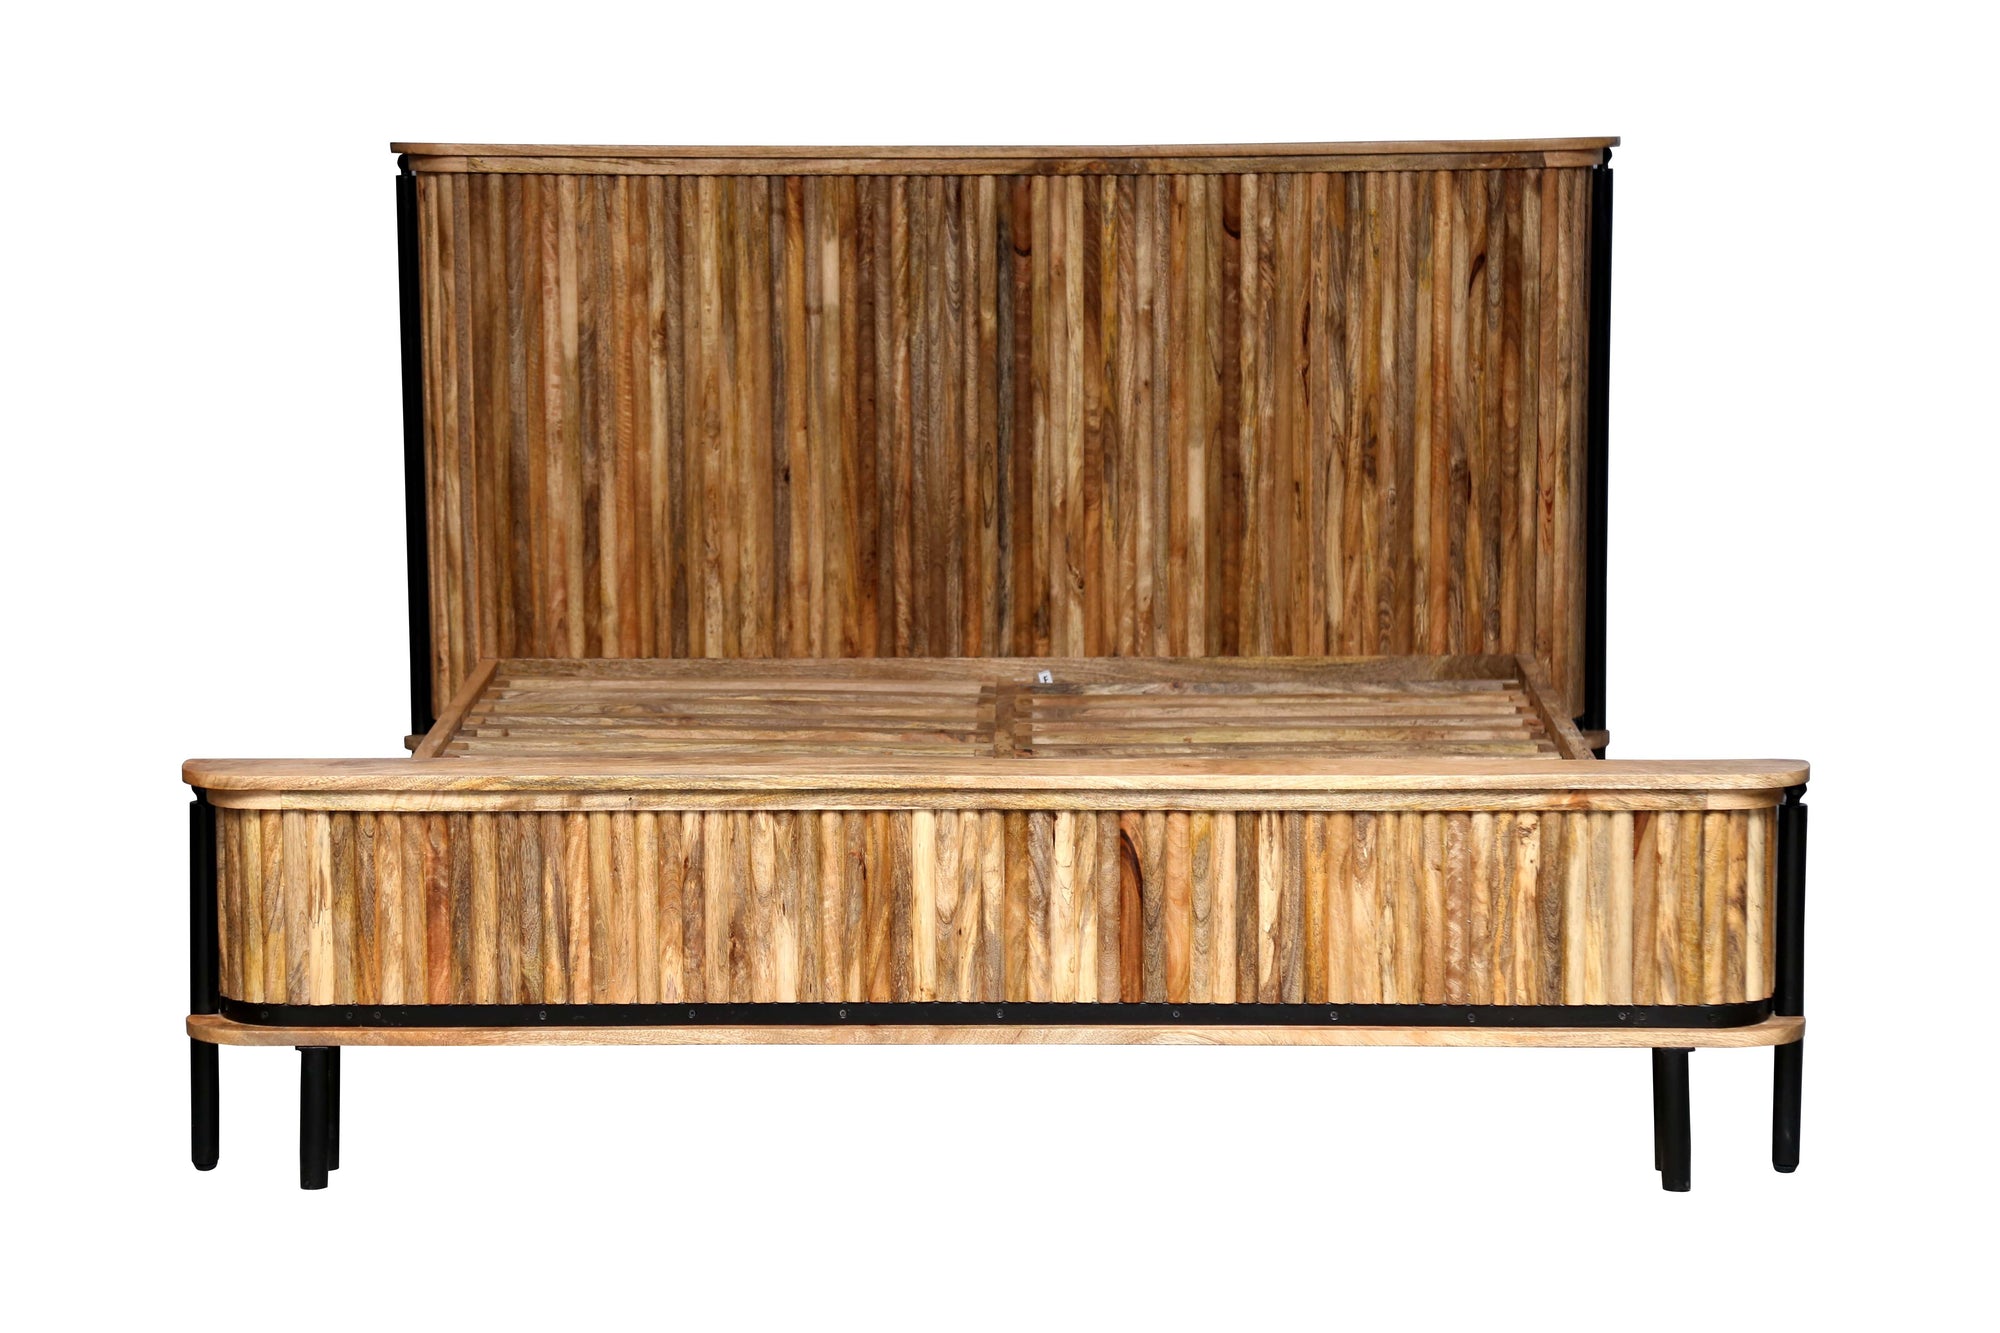 OVAL-Solid Mango mid century modern King Bed